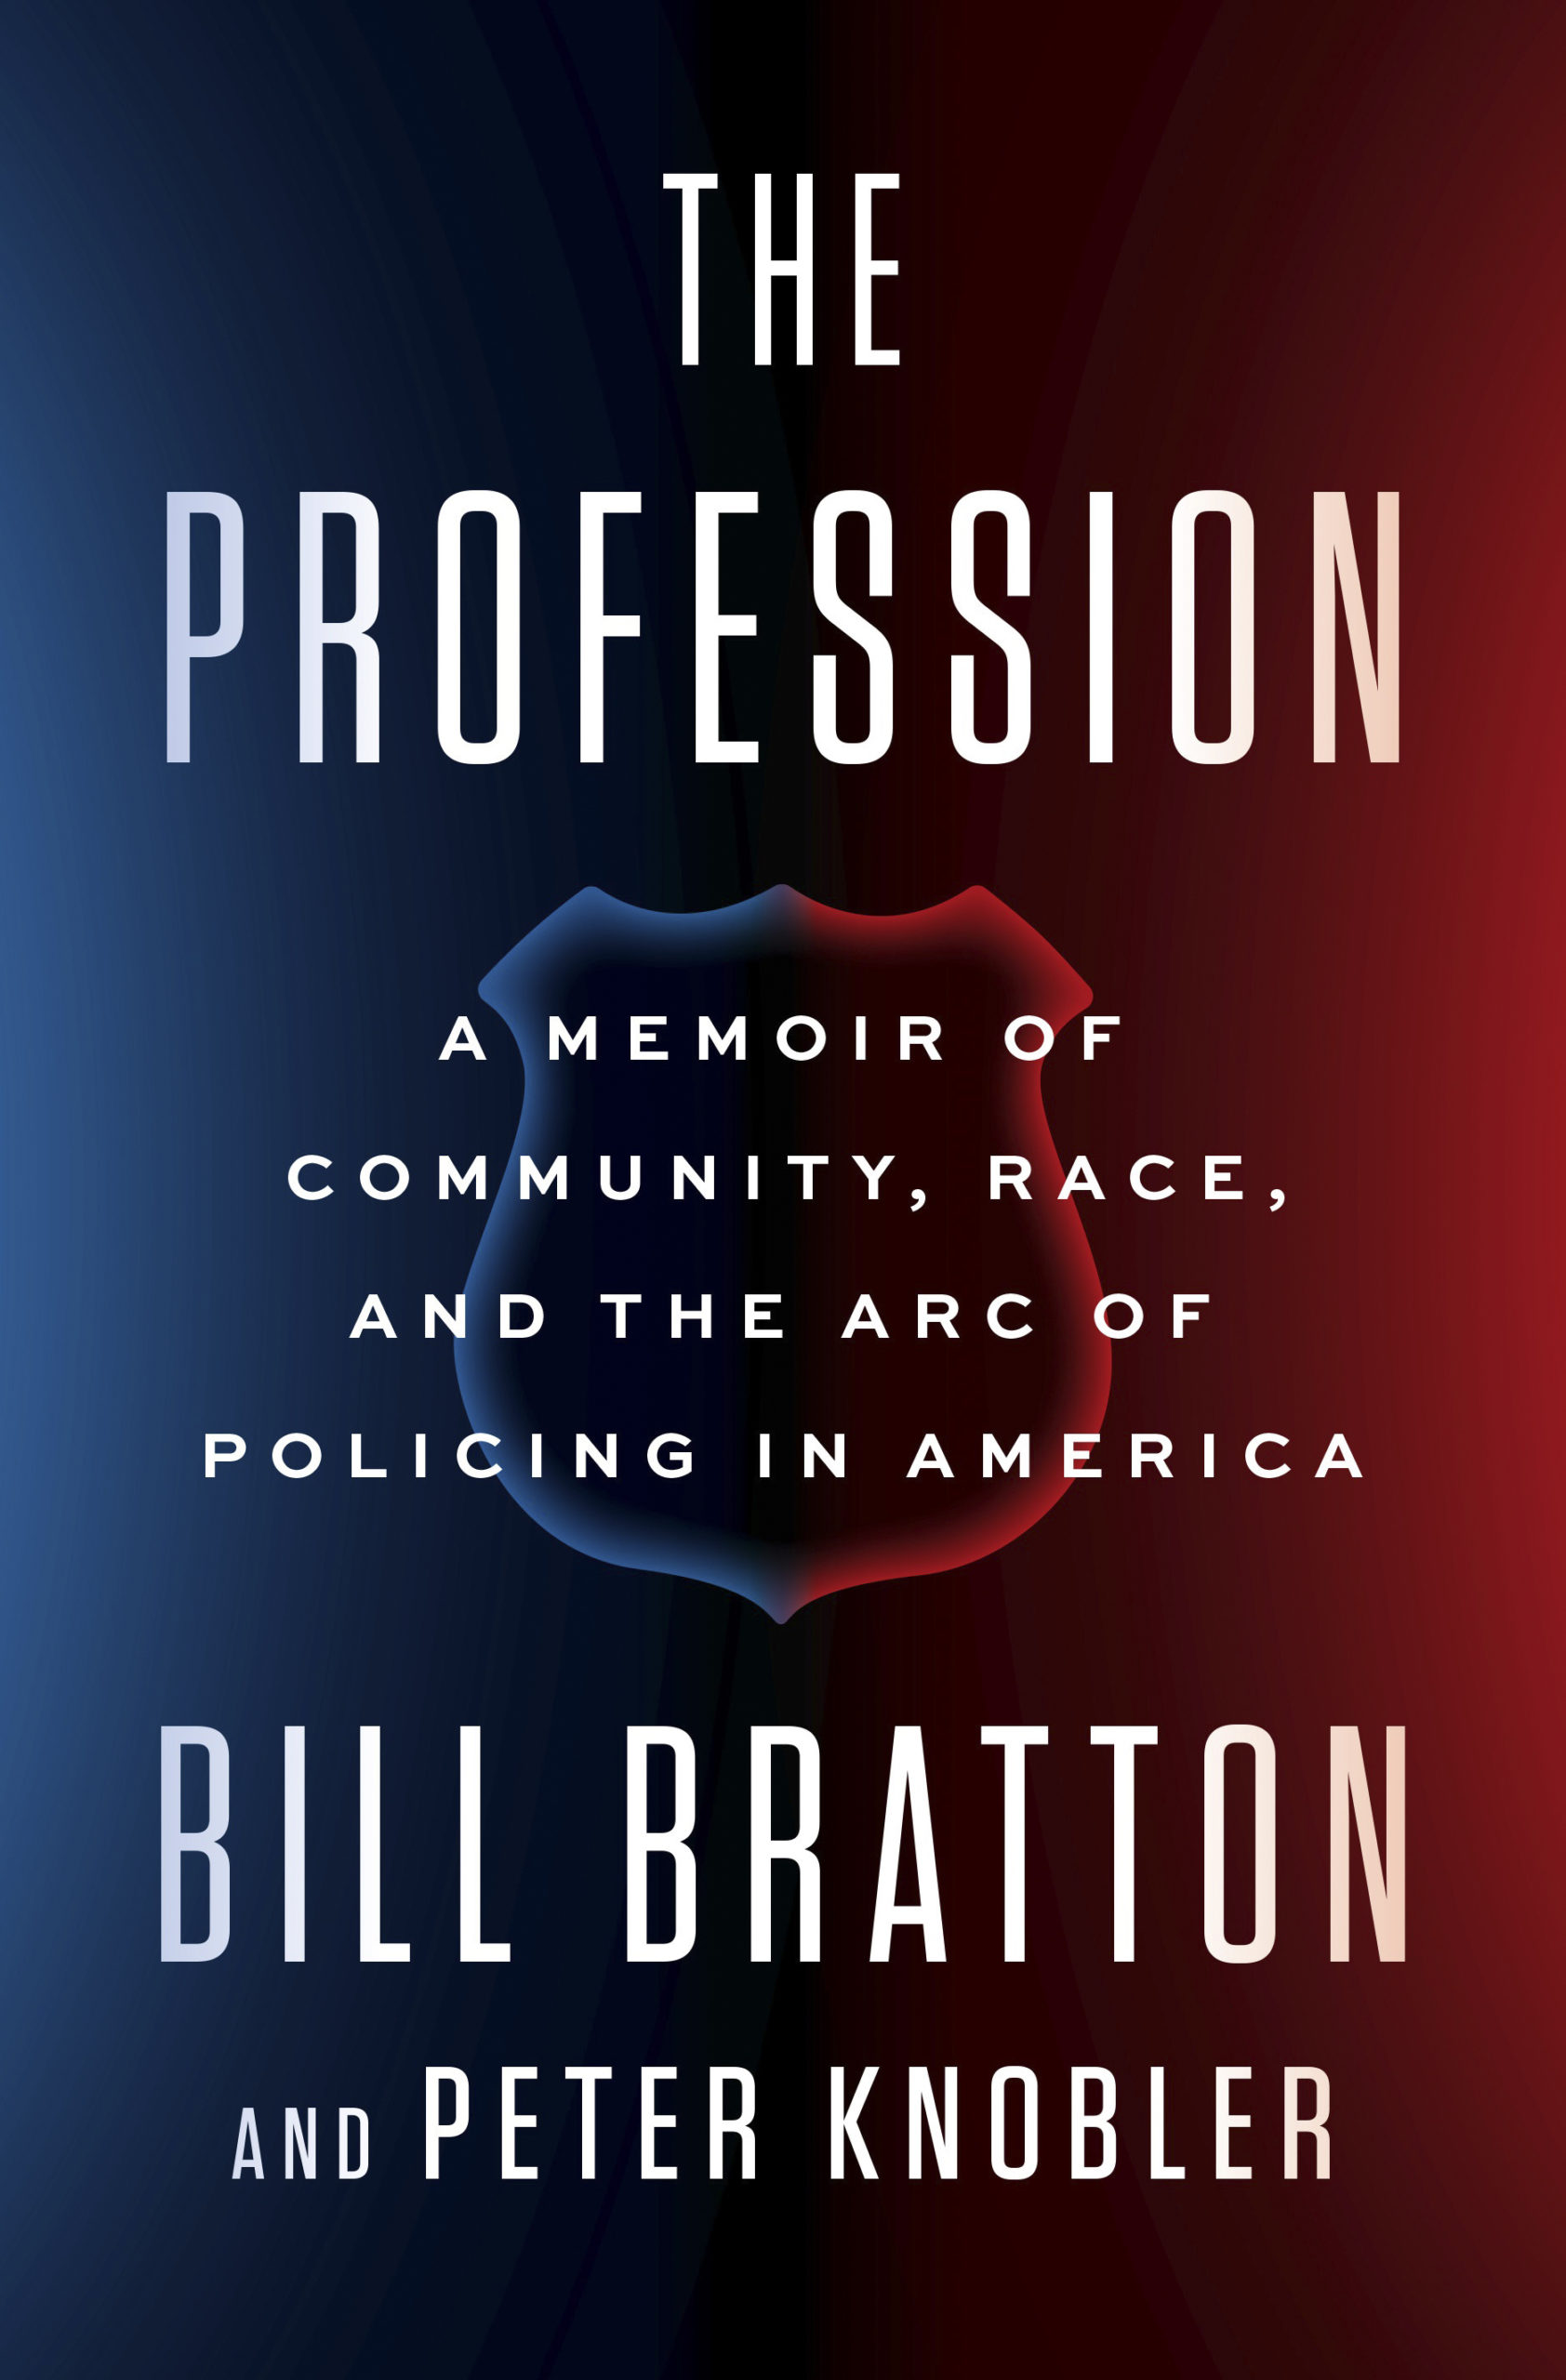 Bill Bratton's “The Profession: A Memoir of Community, Race, and the Arc of Policing in America,” with co-author Peter Knobler.